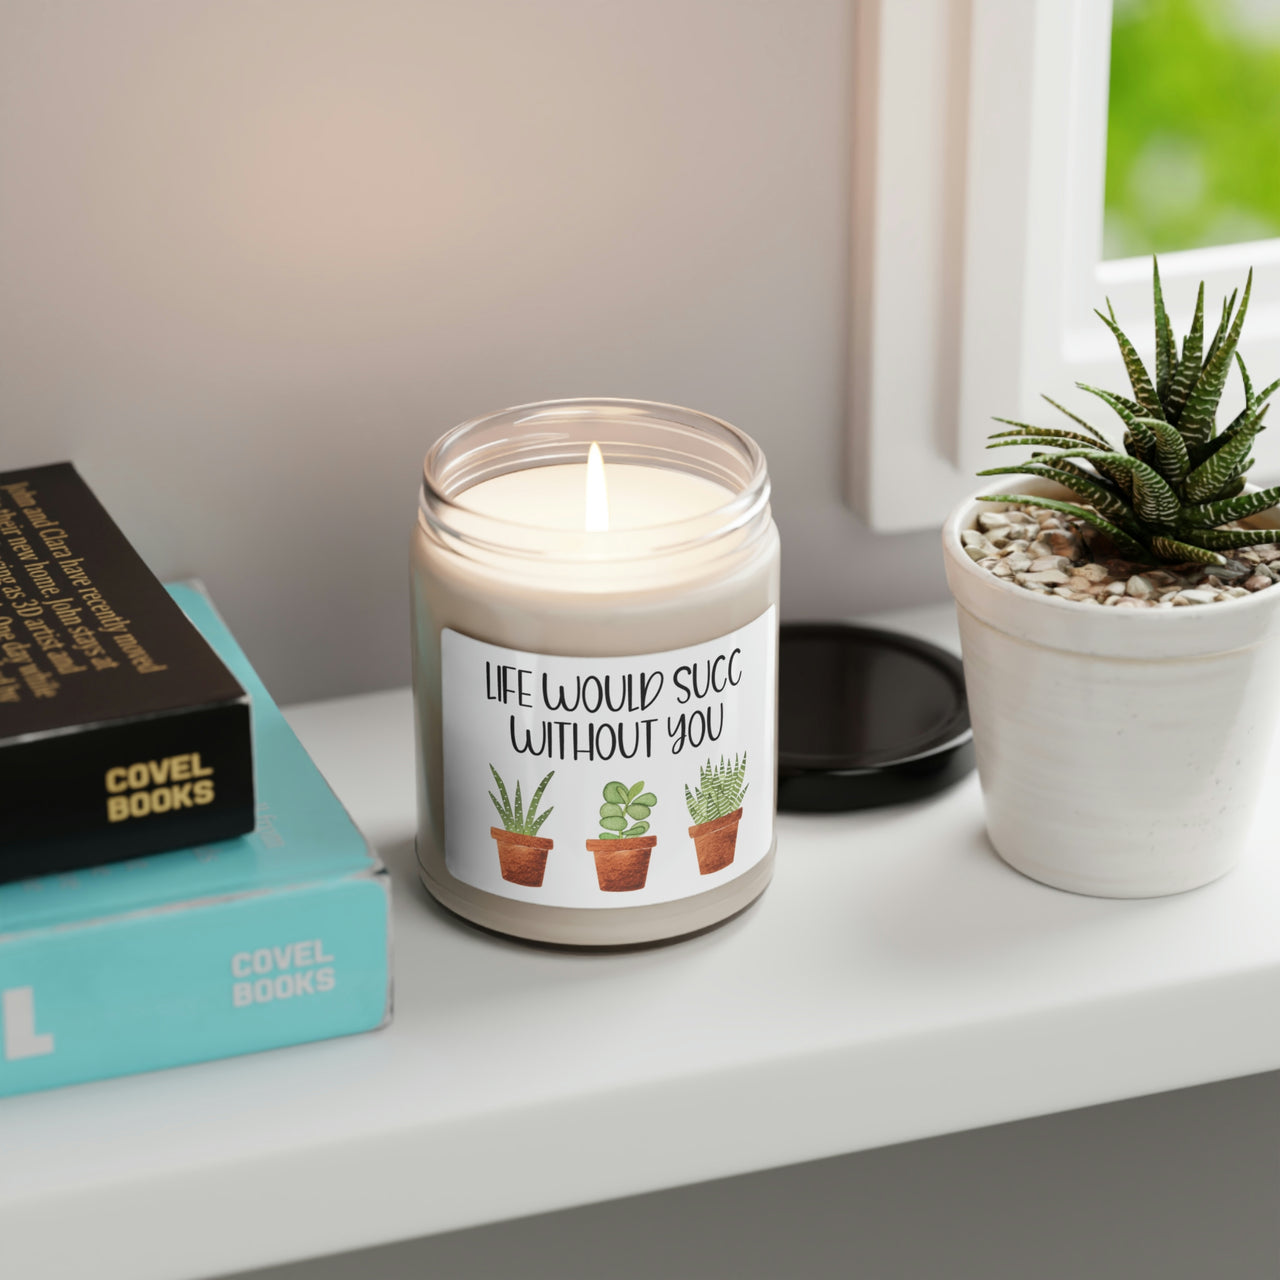 Life Would Succ Without You Candle - Succulent Plant Lover Gift